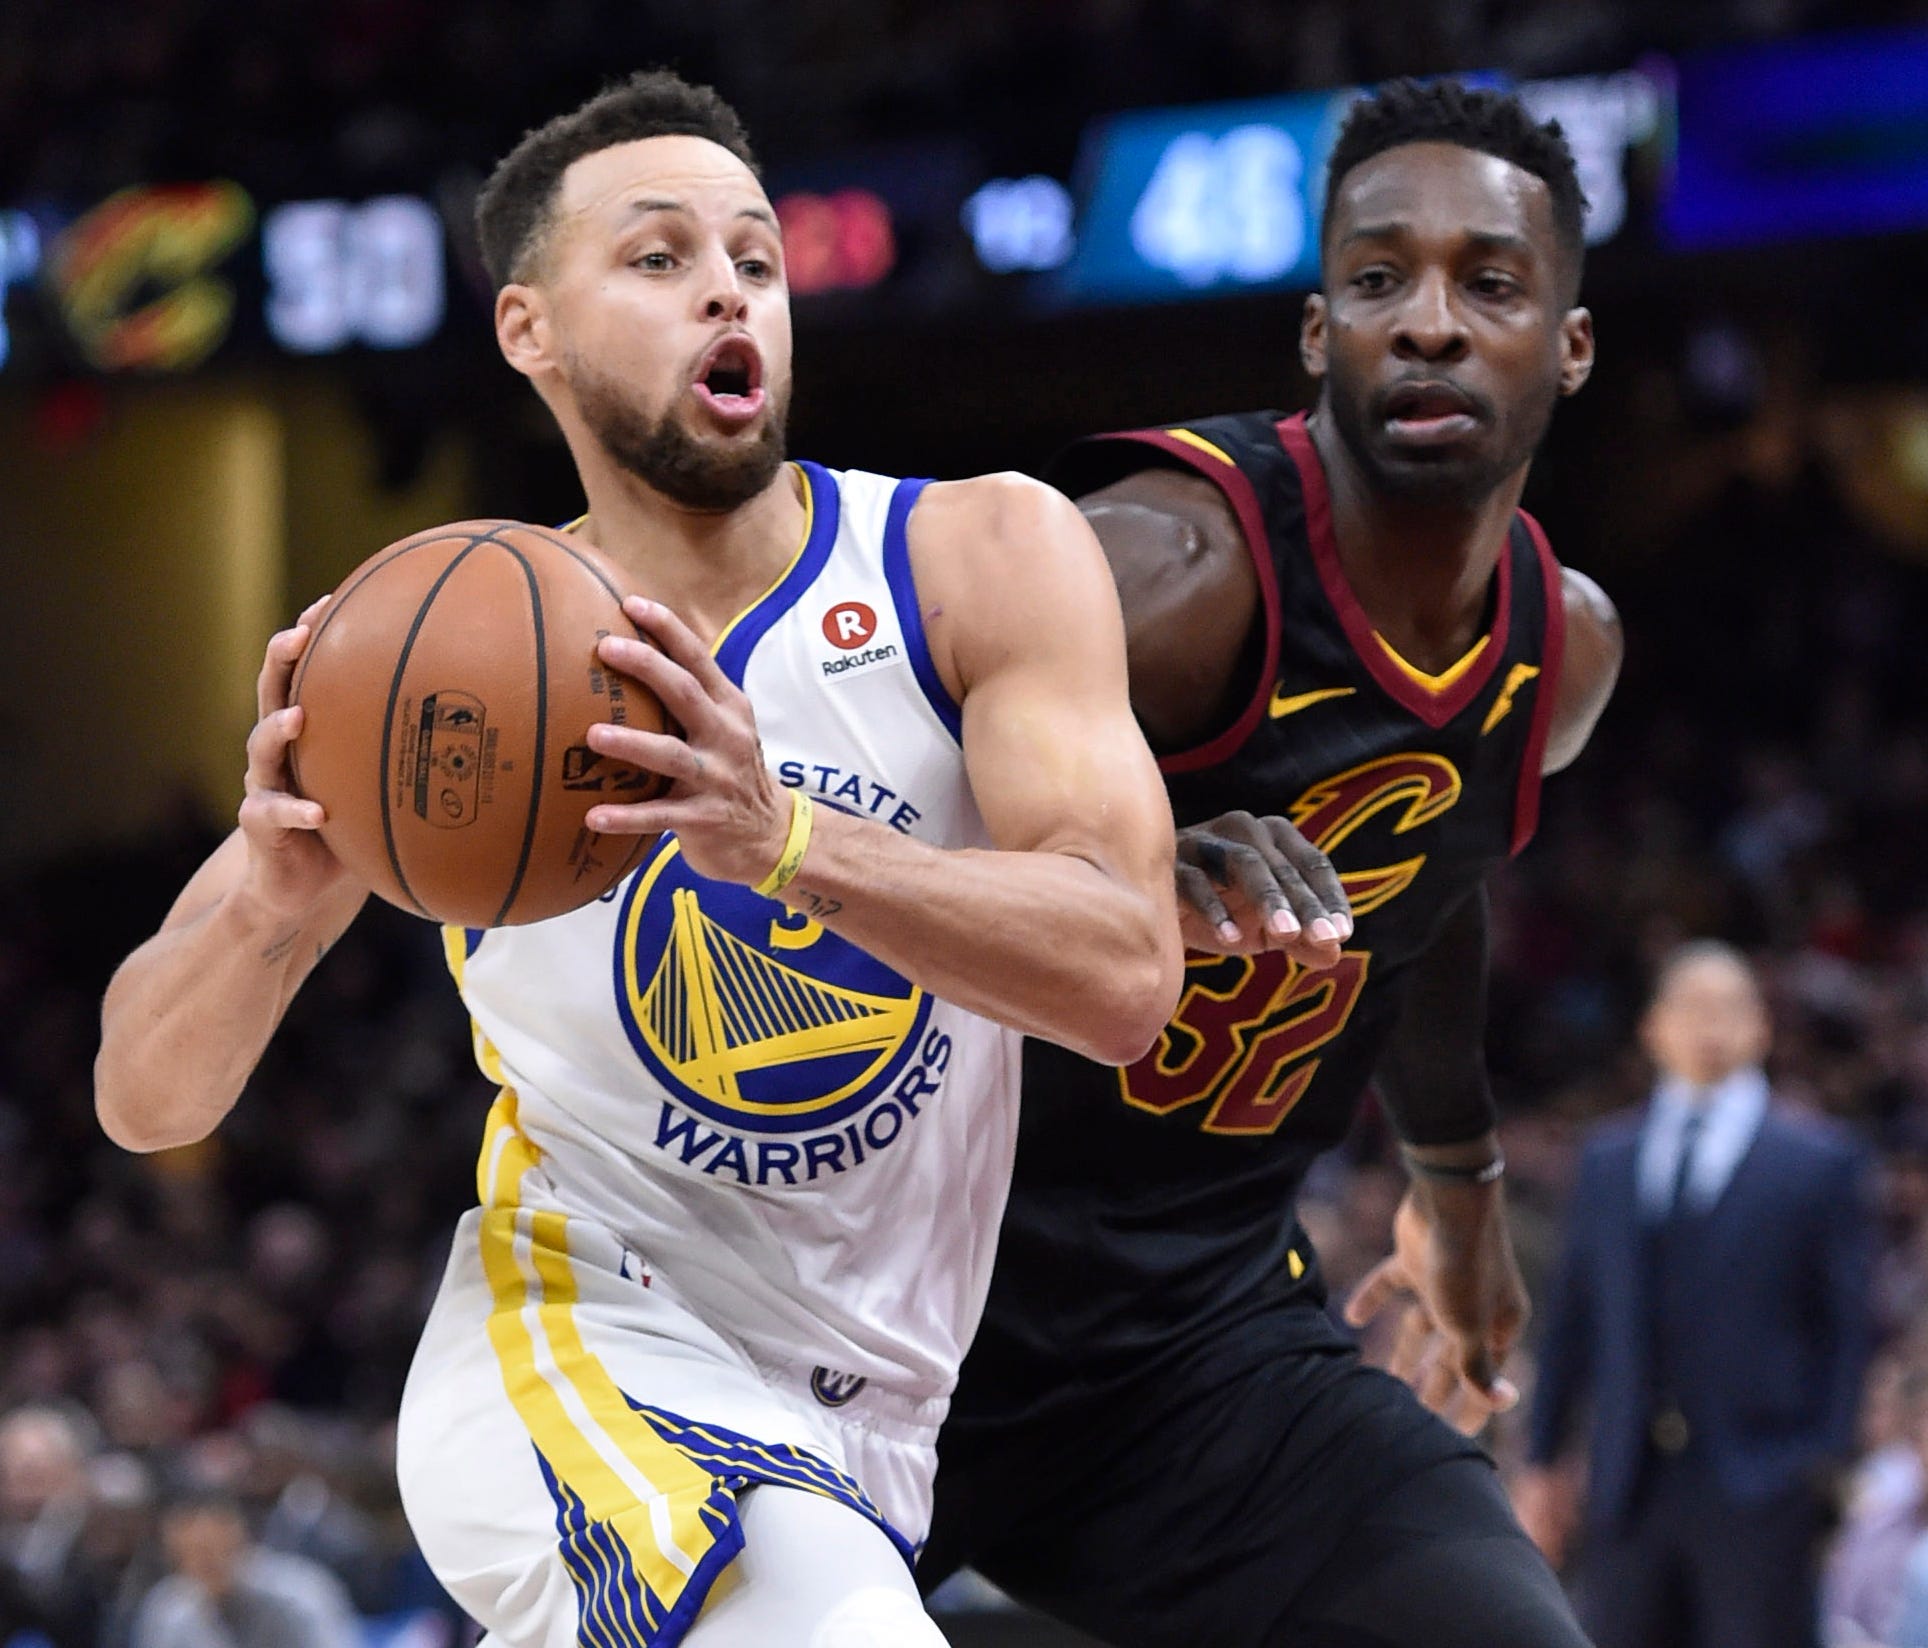 Steph Curry  drives to the basket against the Cavaliers' Jeff Green.